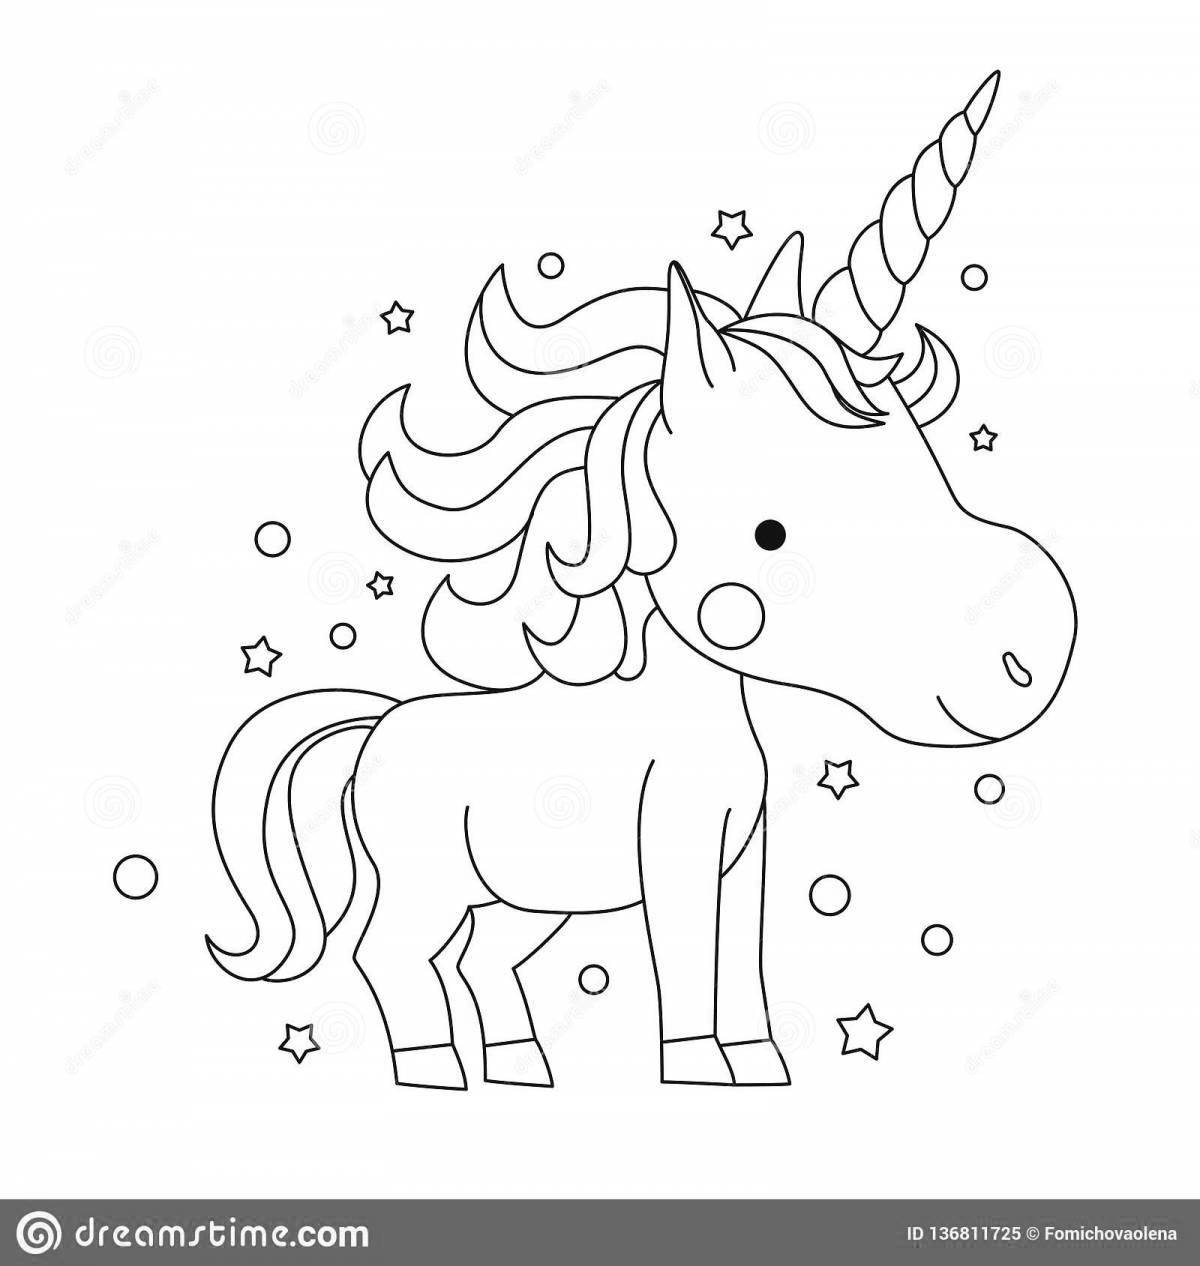 Great unicorn coloring by numbers for kids